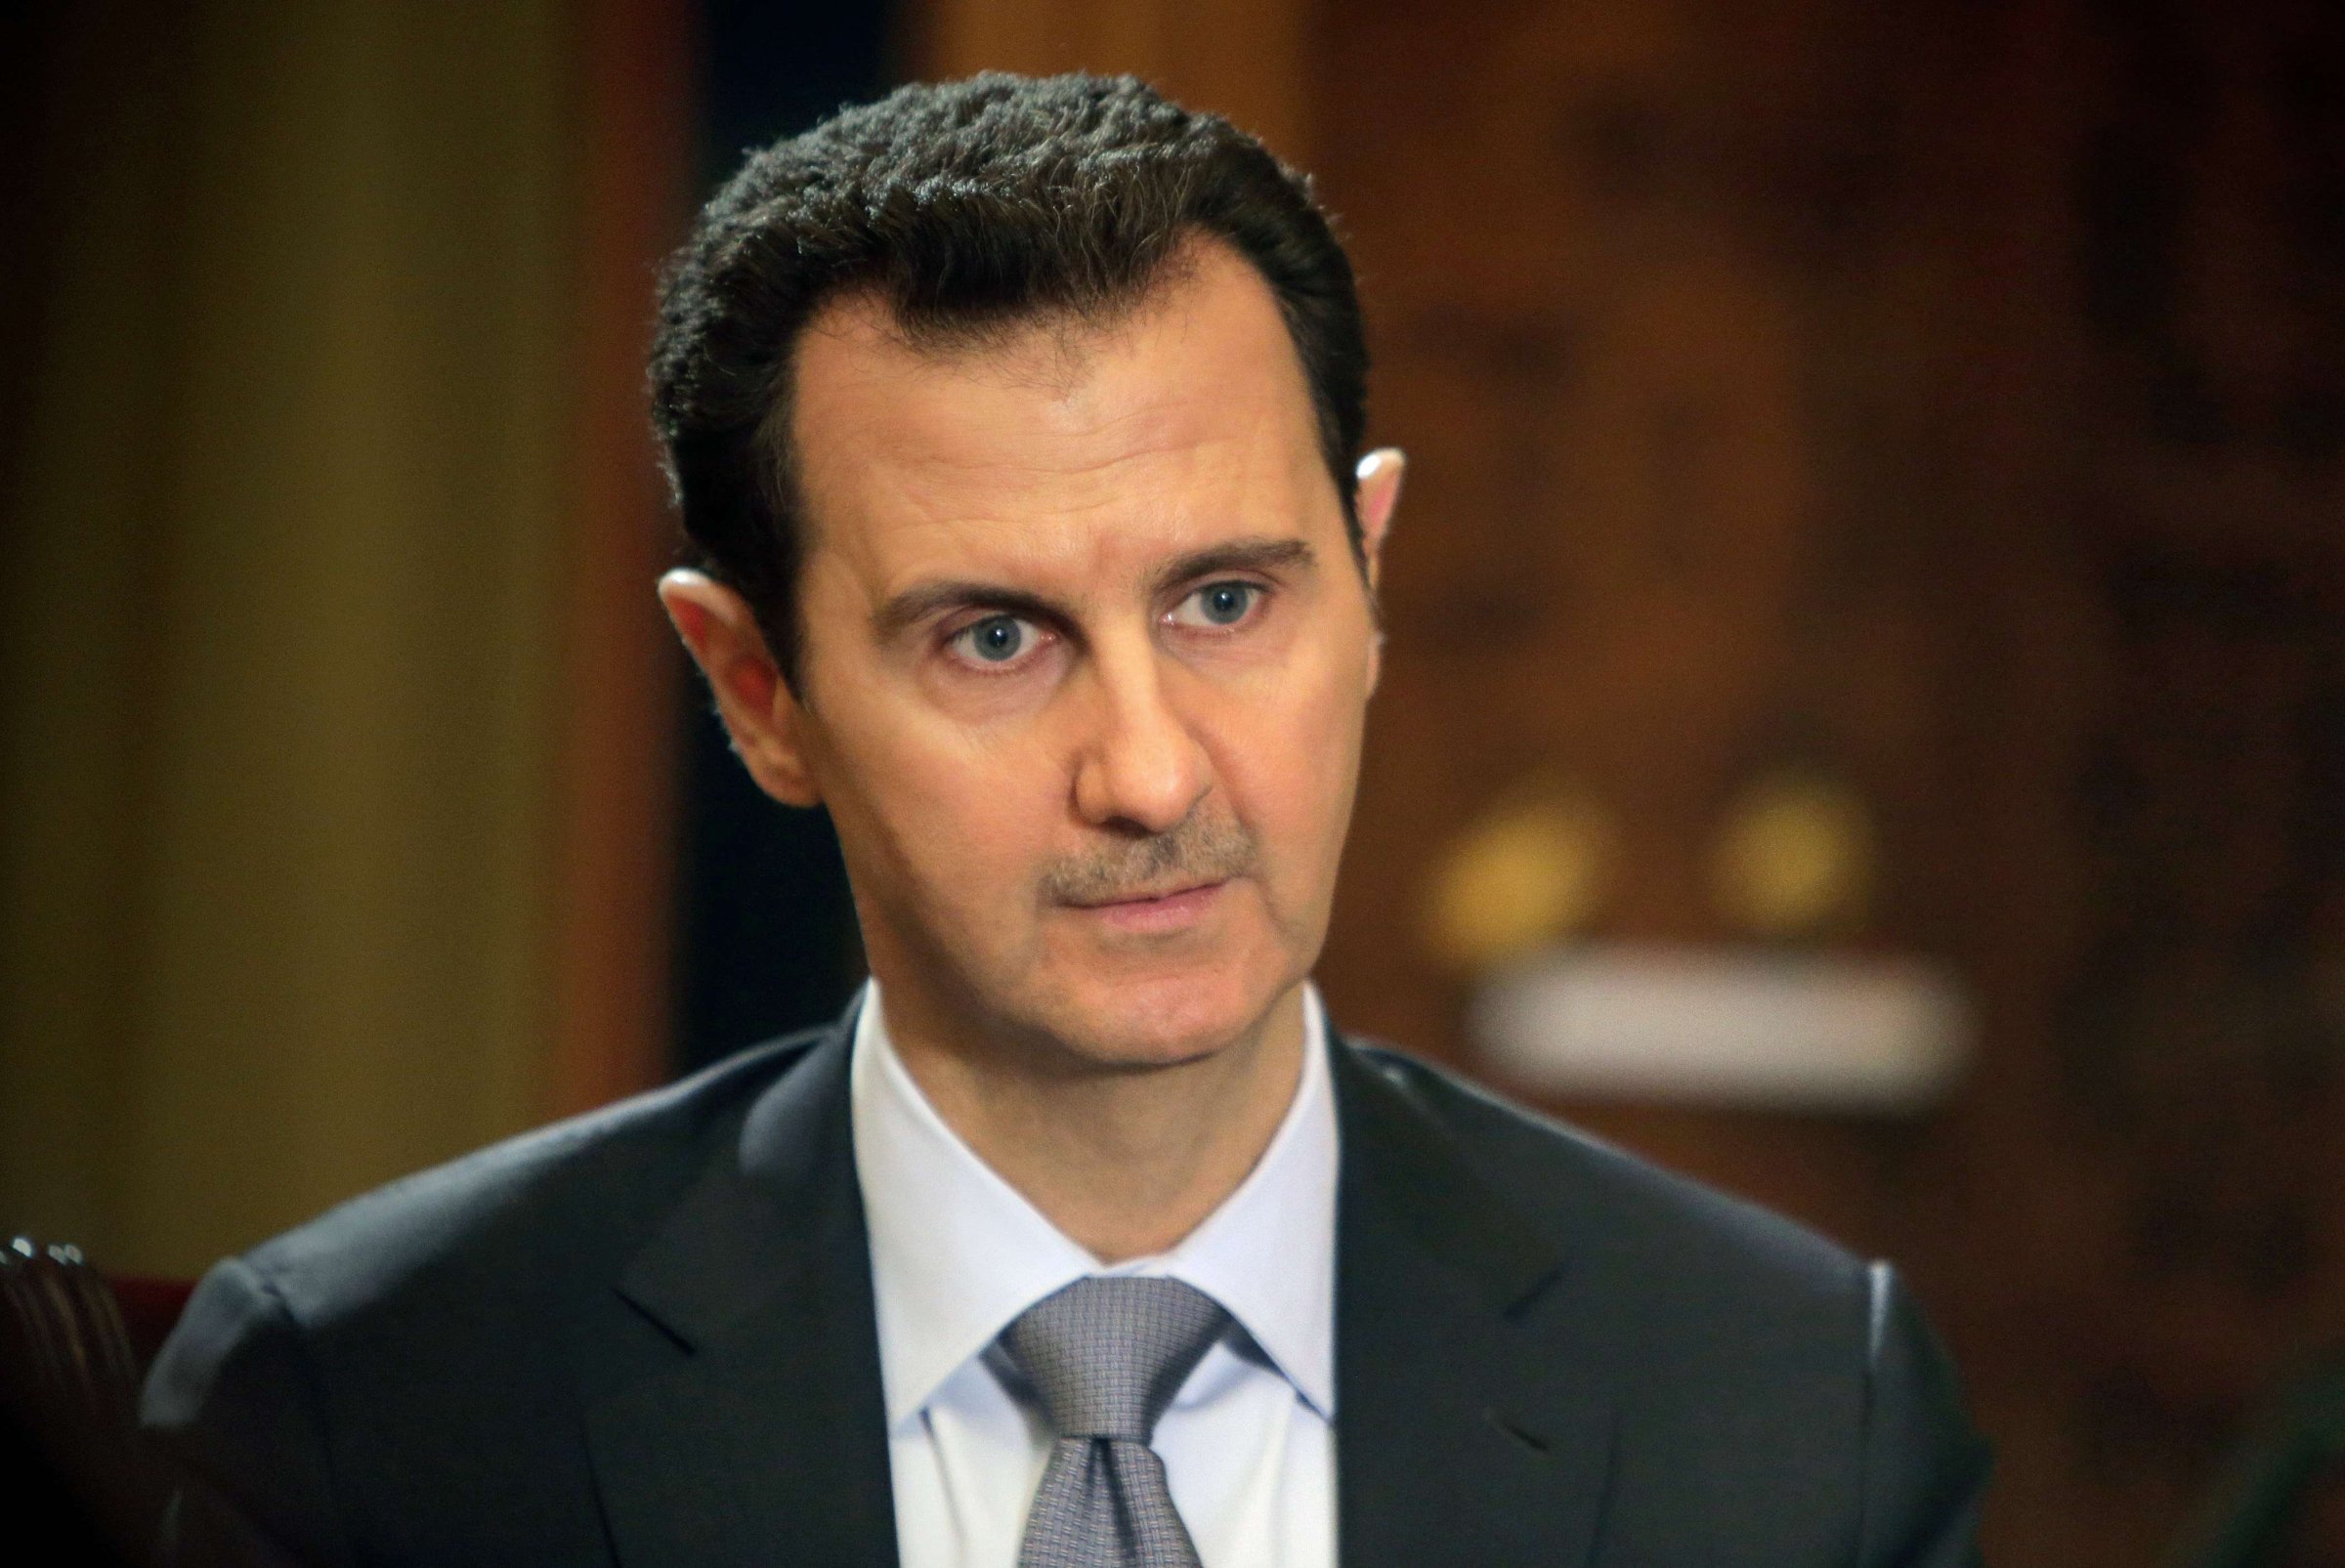 Syrian President Bashar al-Assad during an interview with AFP in at the presidential palace in Damascus, in a photo released on Jan. 20, 2014.